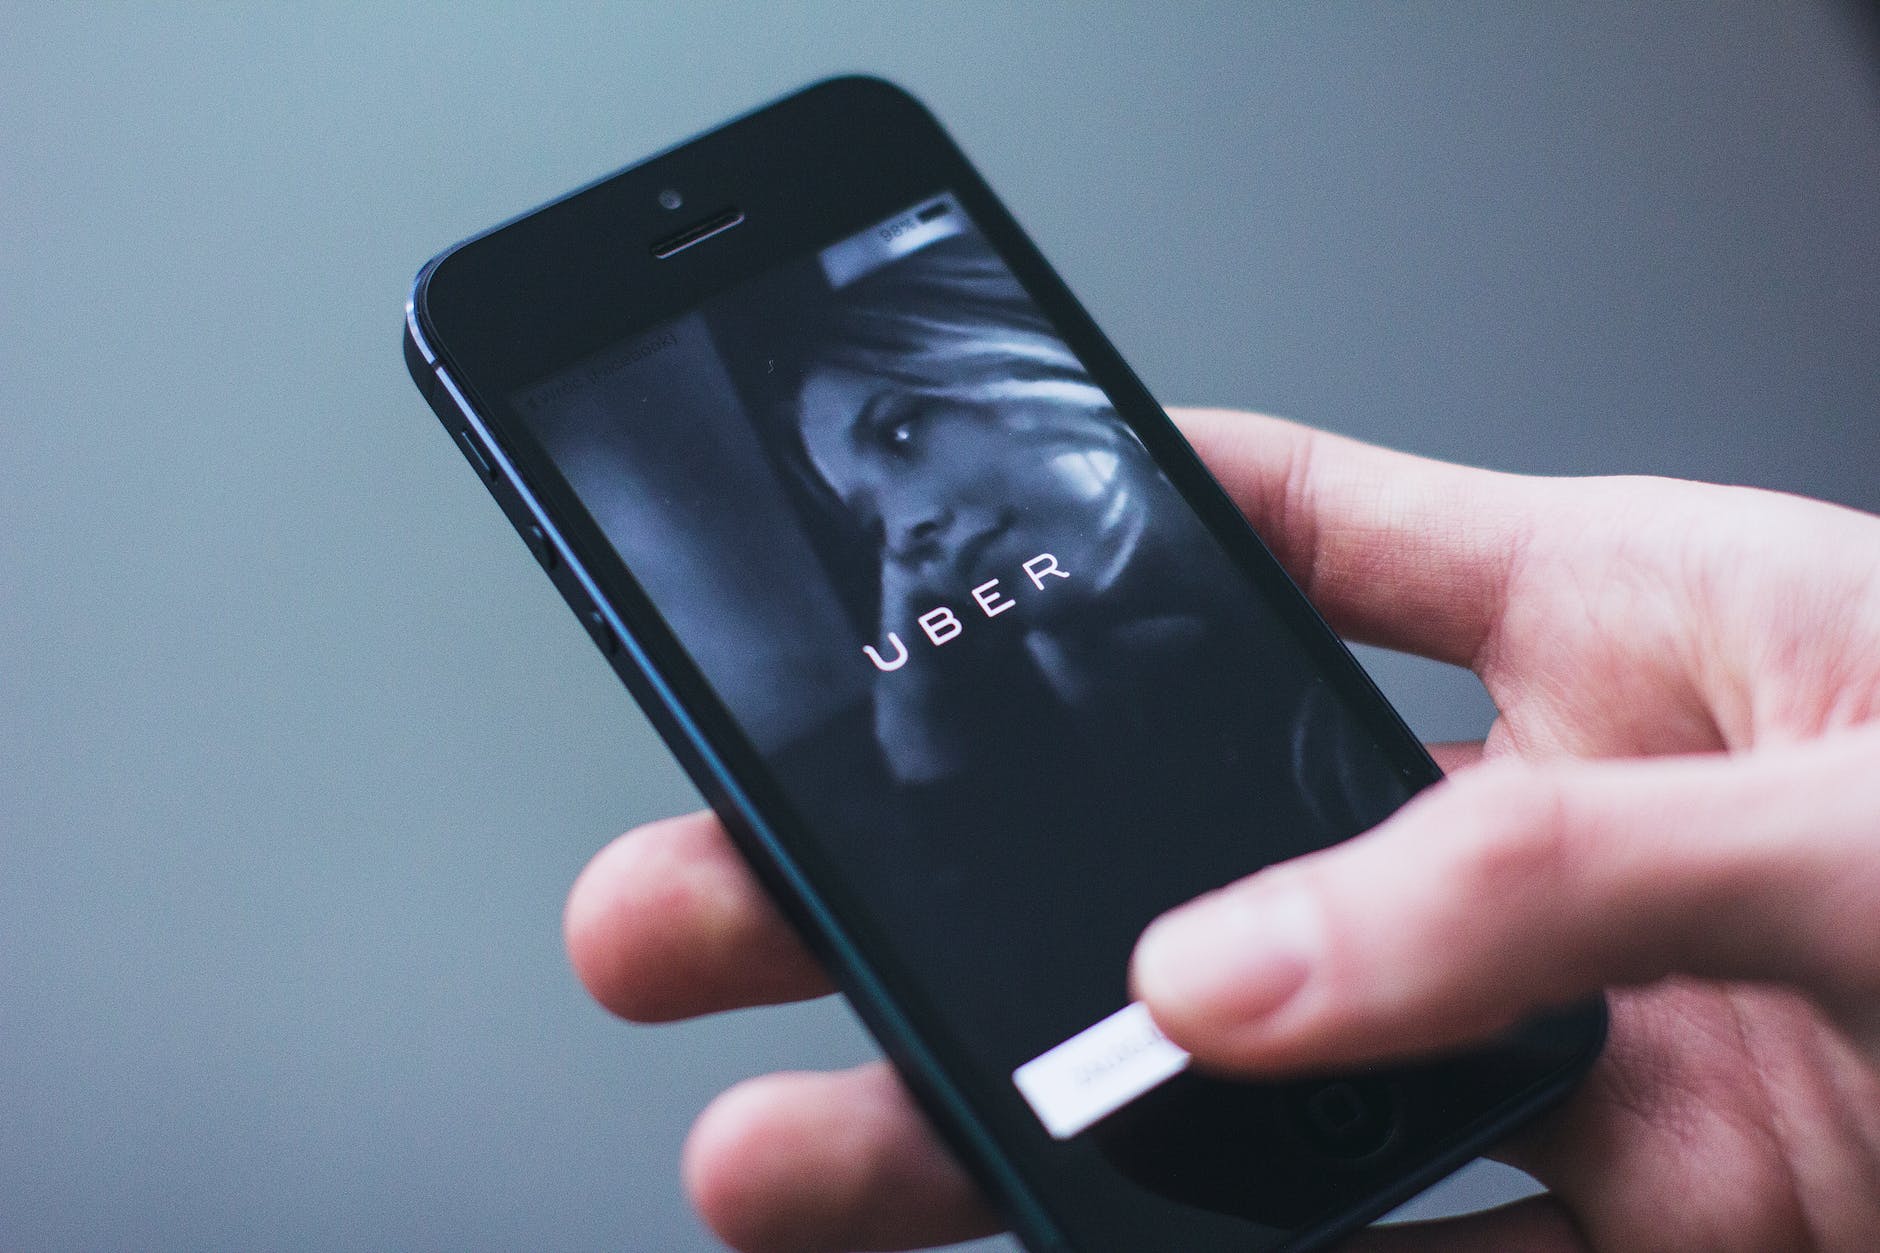 Uber falls victim to the latest hacking breach which could’ve been prevented